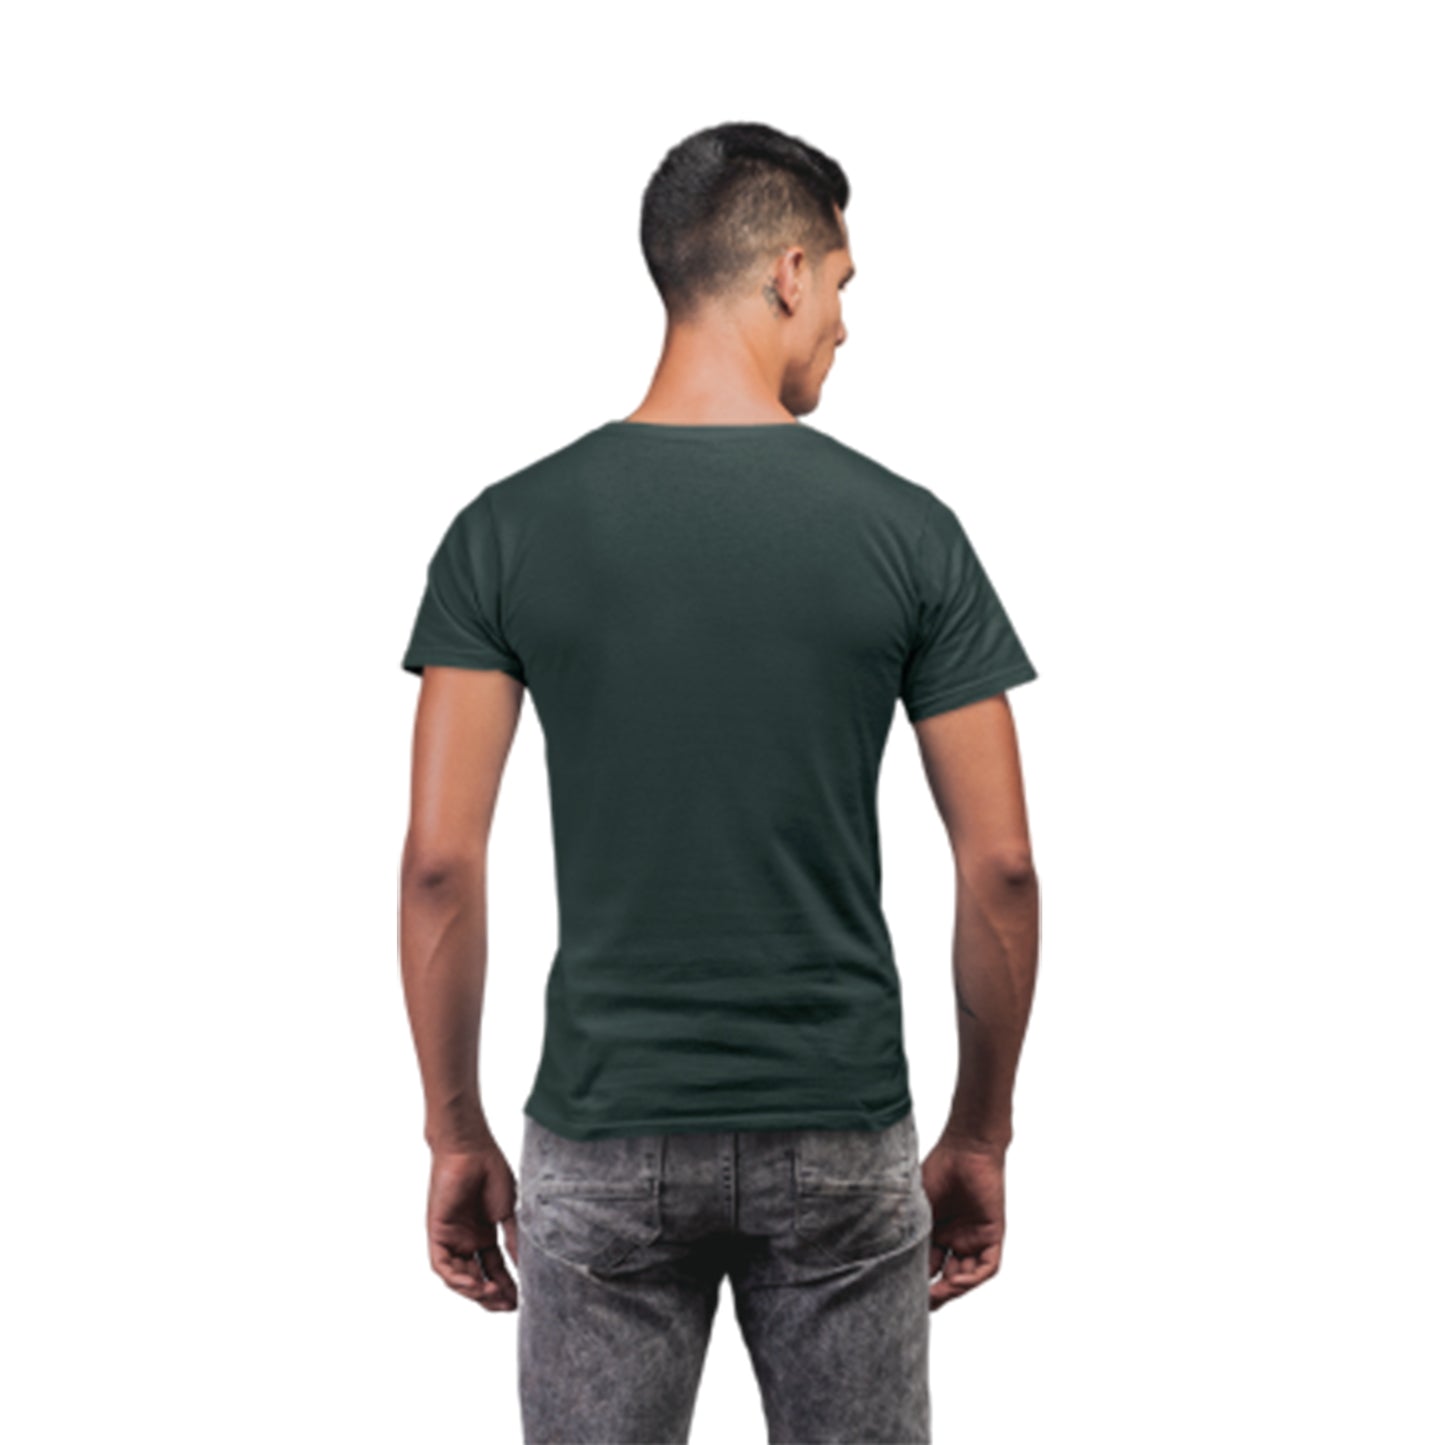 Neo Garments Men's Cotton Round Neck Half Sleeve T-Shirt | DEAR MATH PLEASE GROW UP AND SOLVE YOUR OWN PROBLEMS | SIZE FROM XS TO 2XL